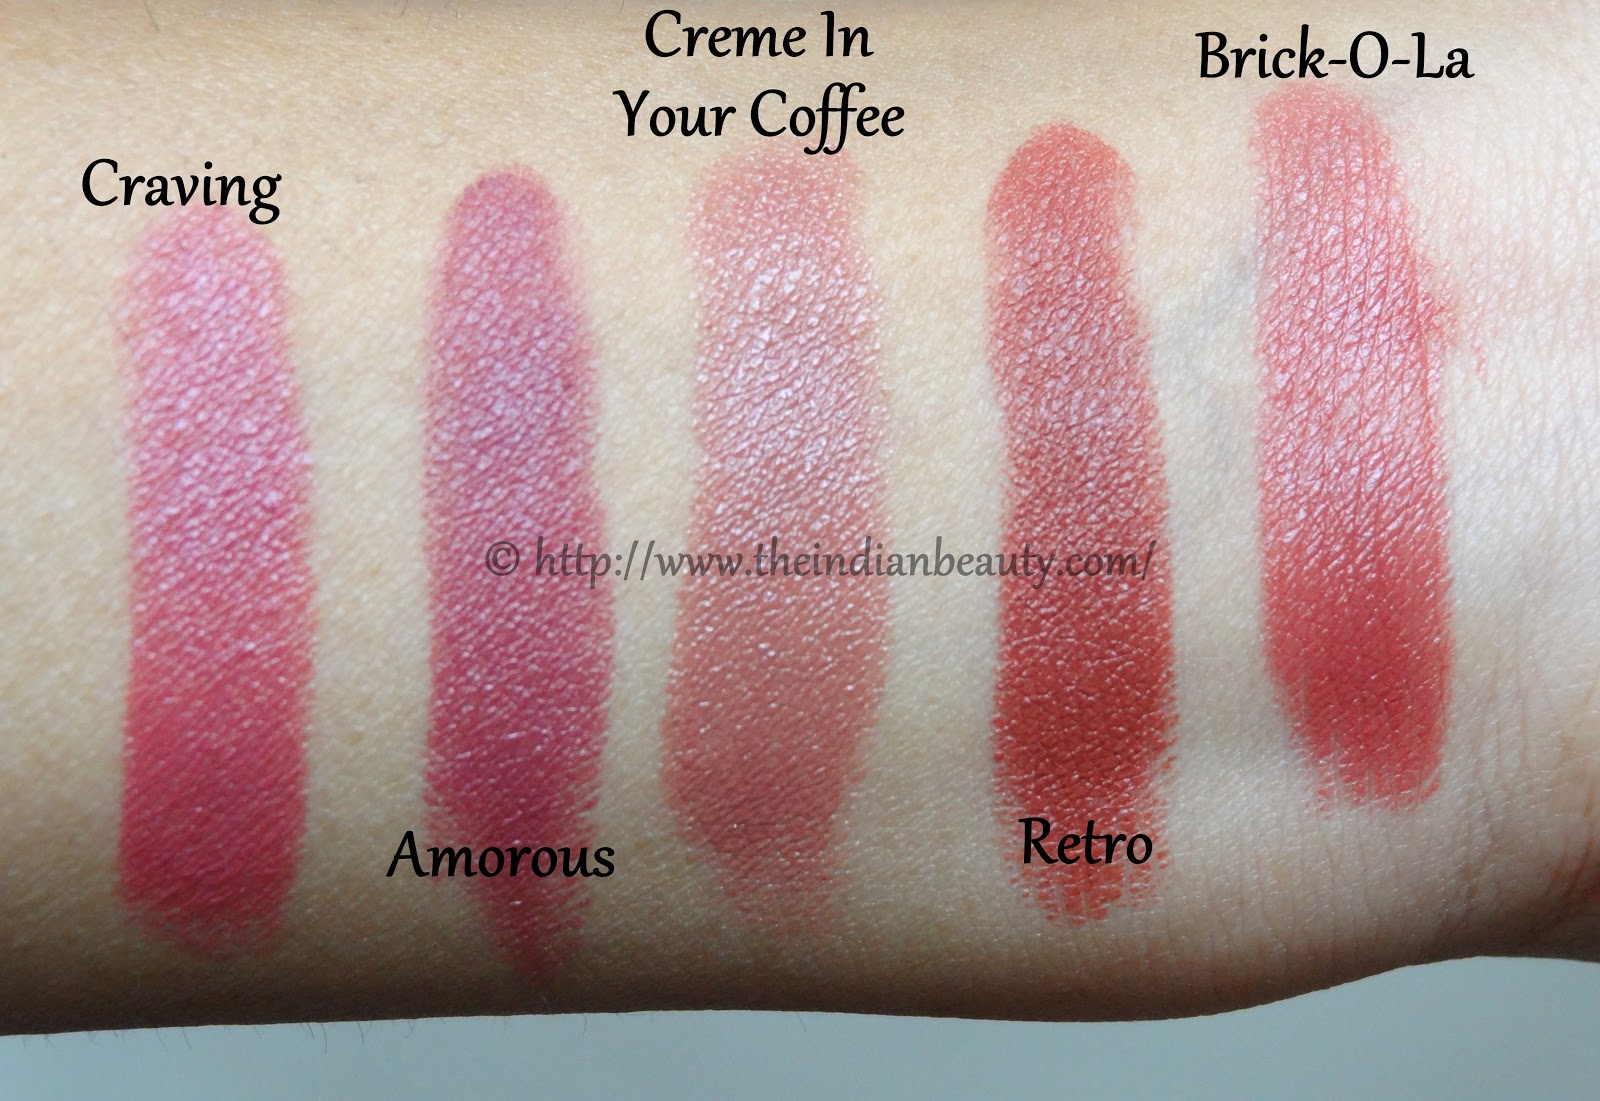 5 Mac Lipsticks Swatches And My Recommendations For Dusky Skin Tone The Indian Beauty Blog